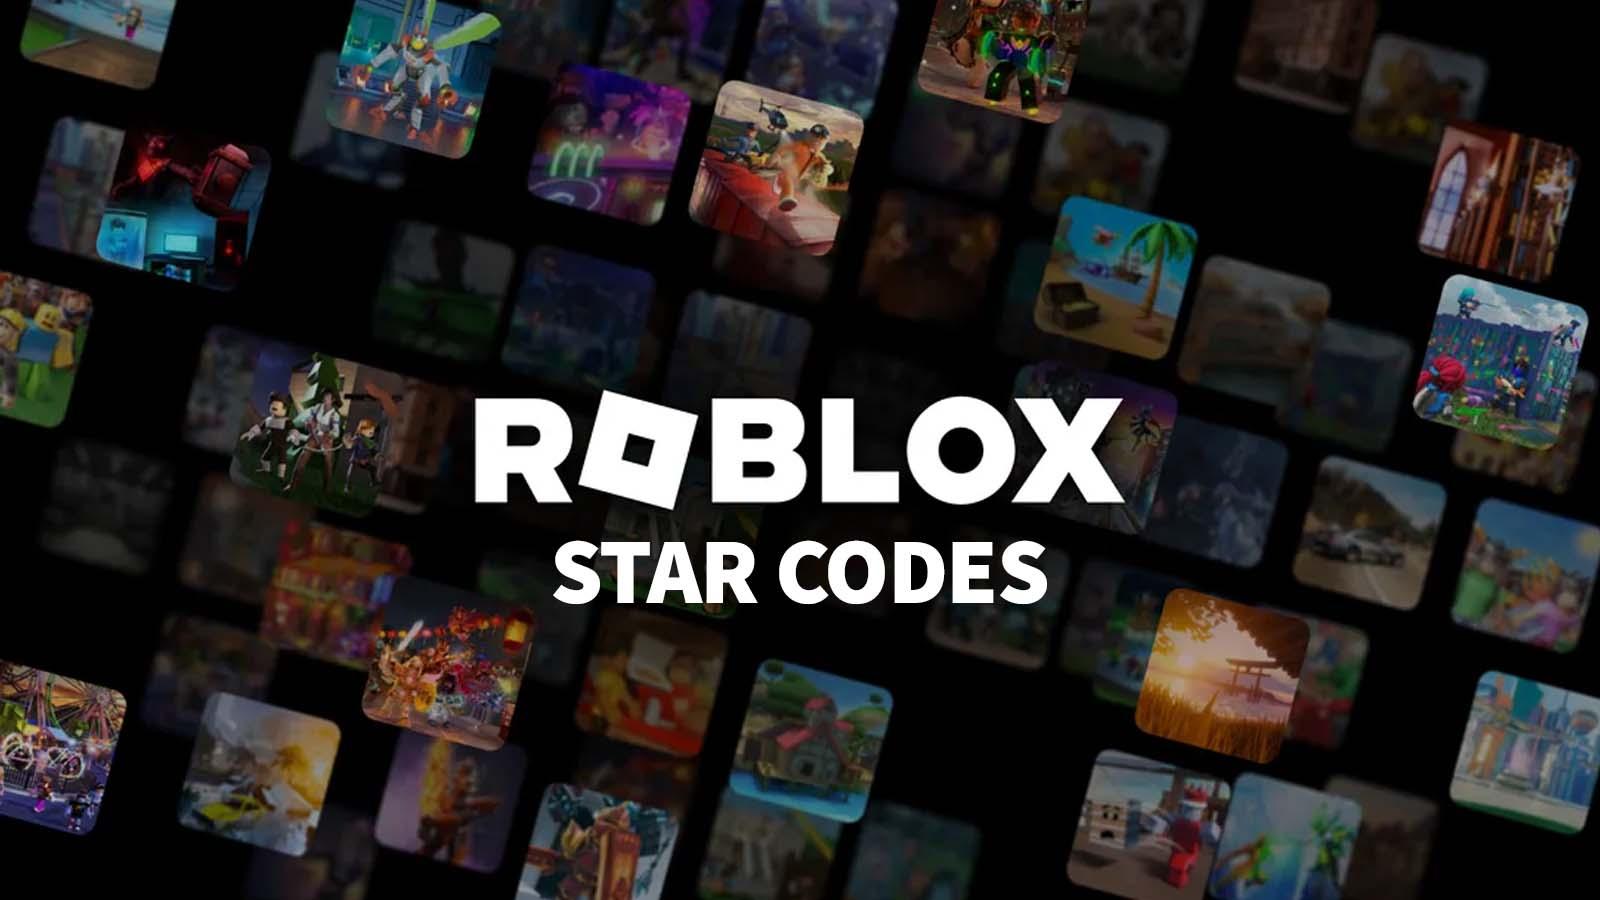 Roblox Star Codes feature image